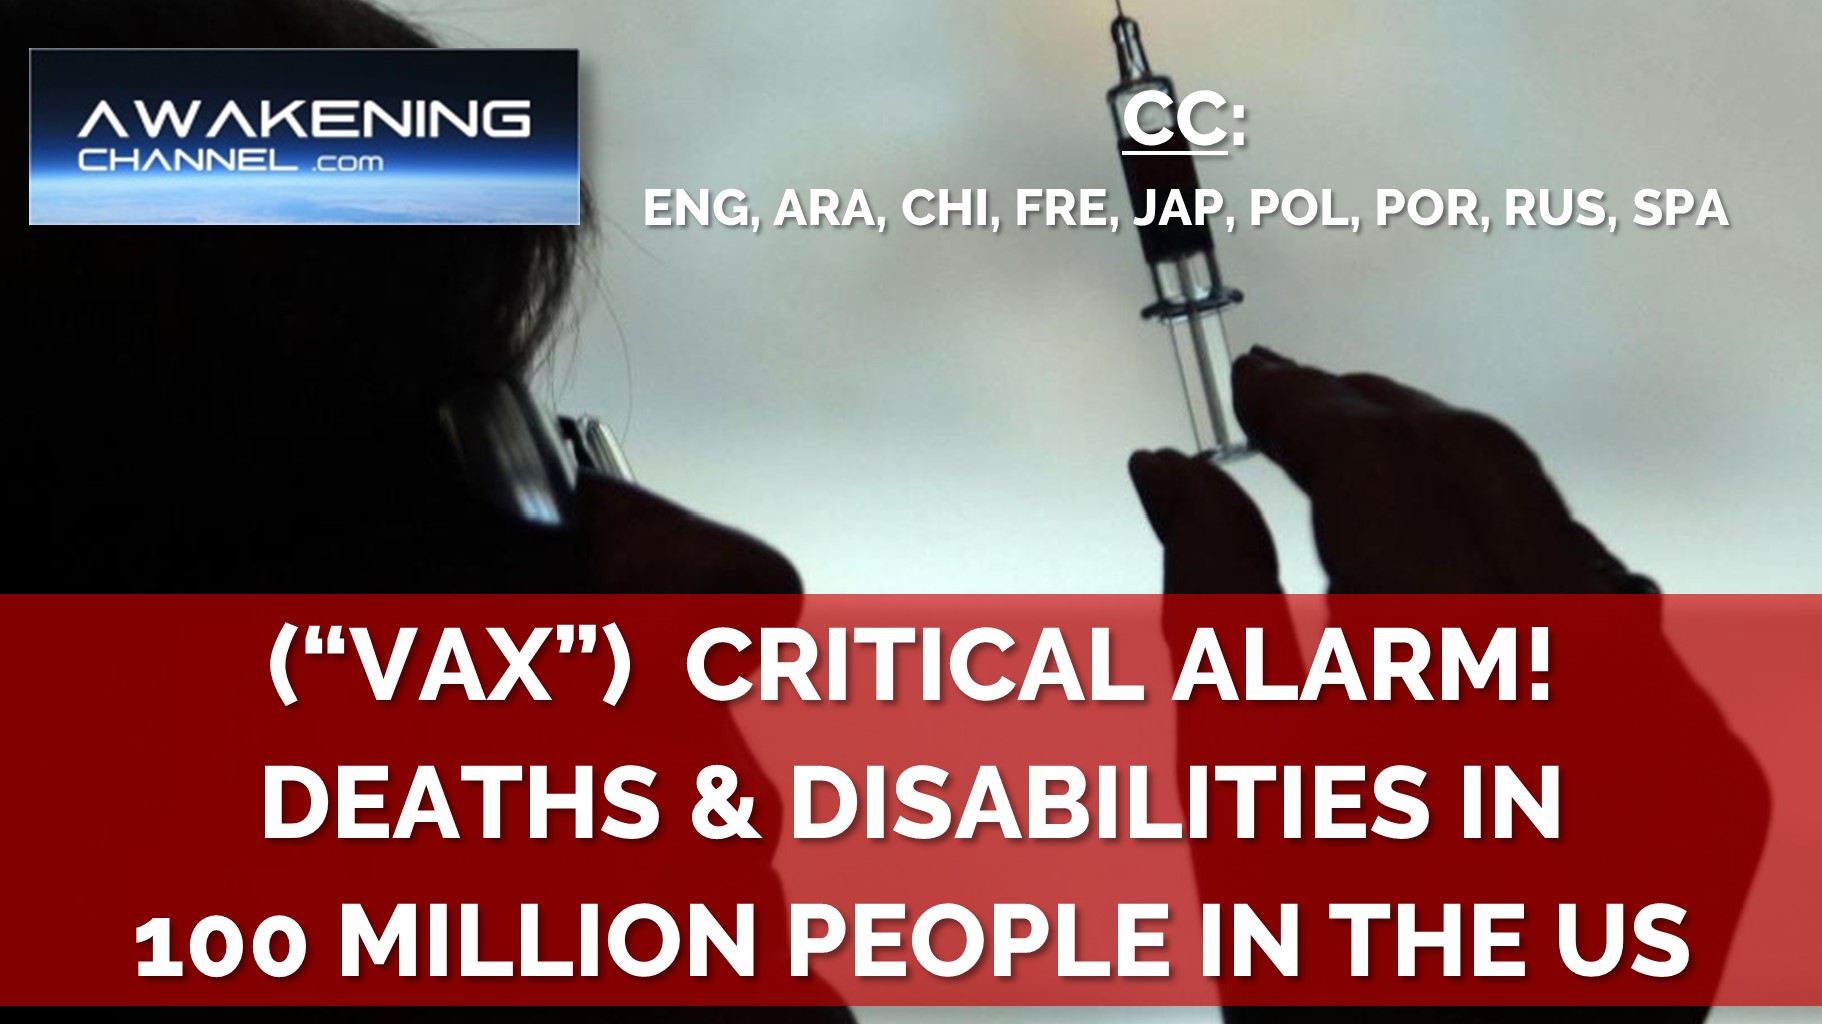 (“Vax”) +30% of the Workforce Affected, Whether Through Death, Disability, or Chronic Illness